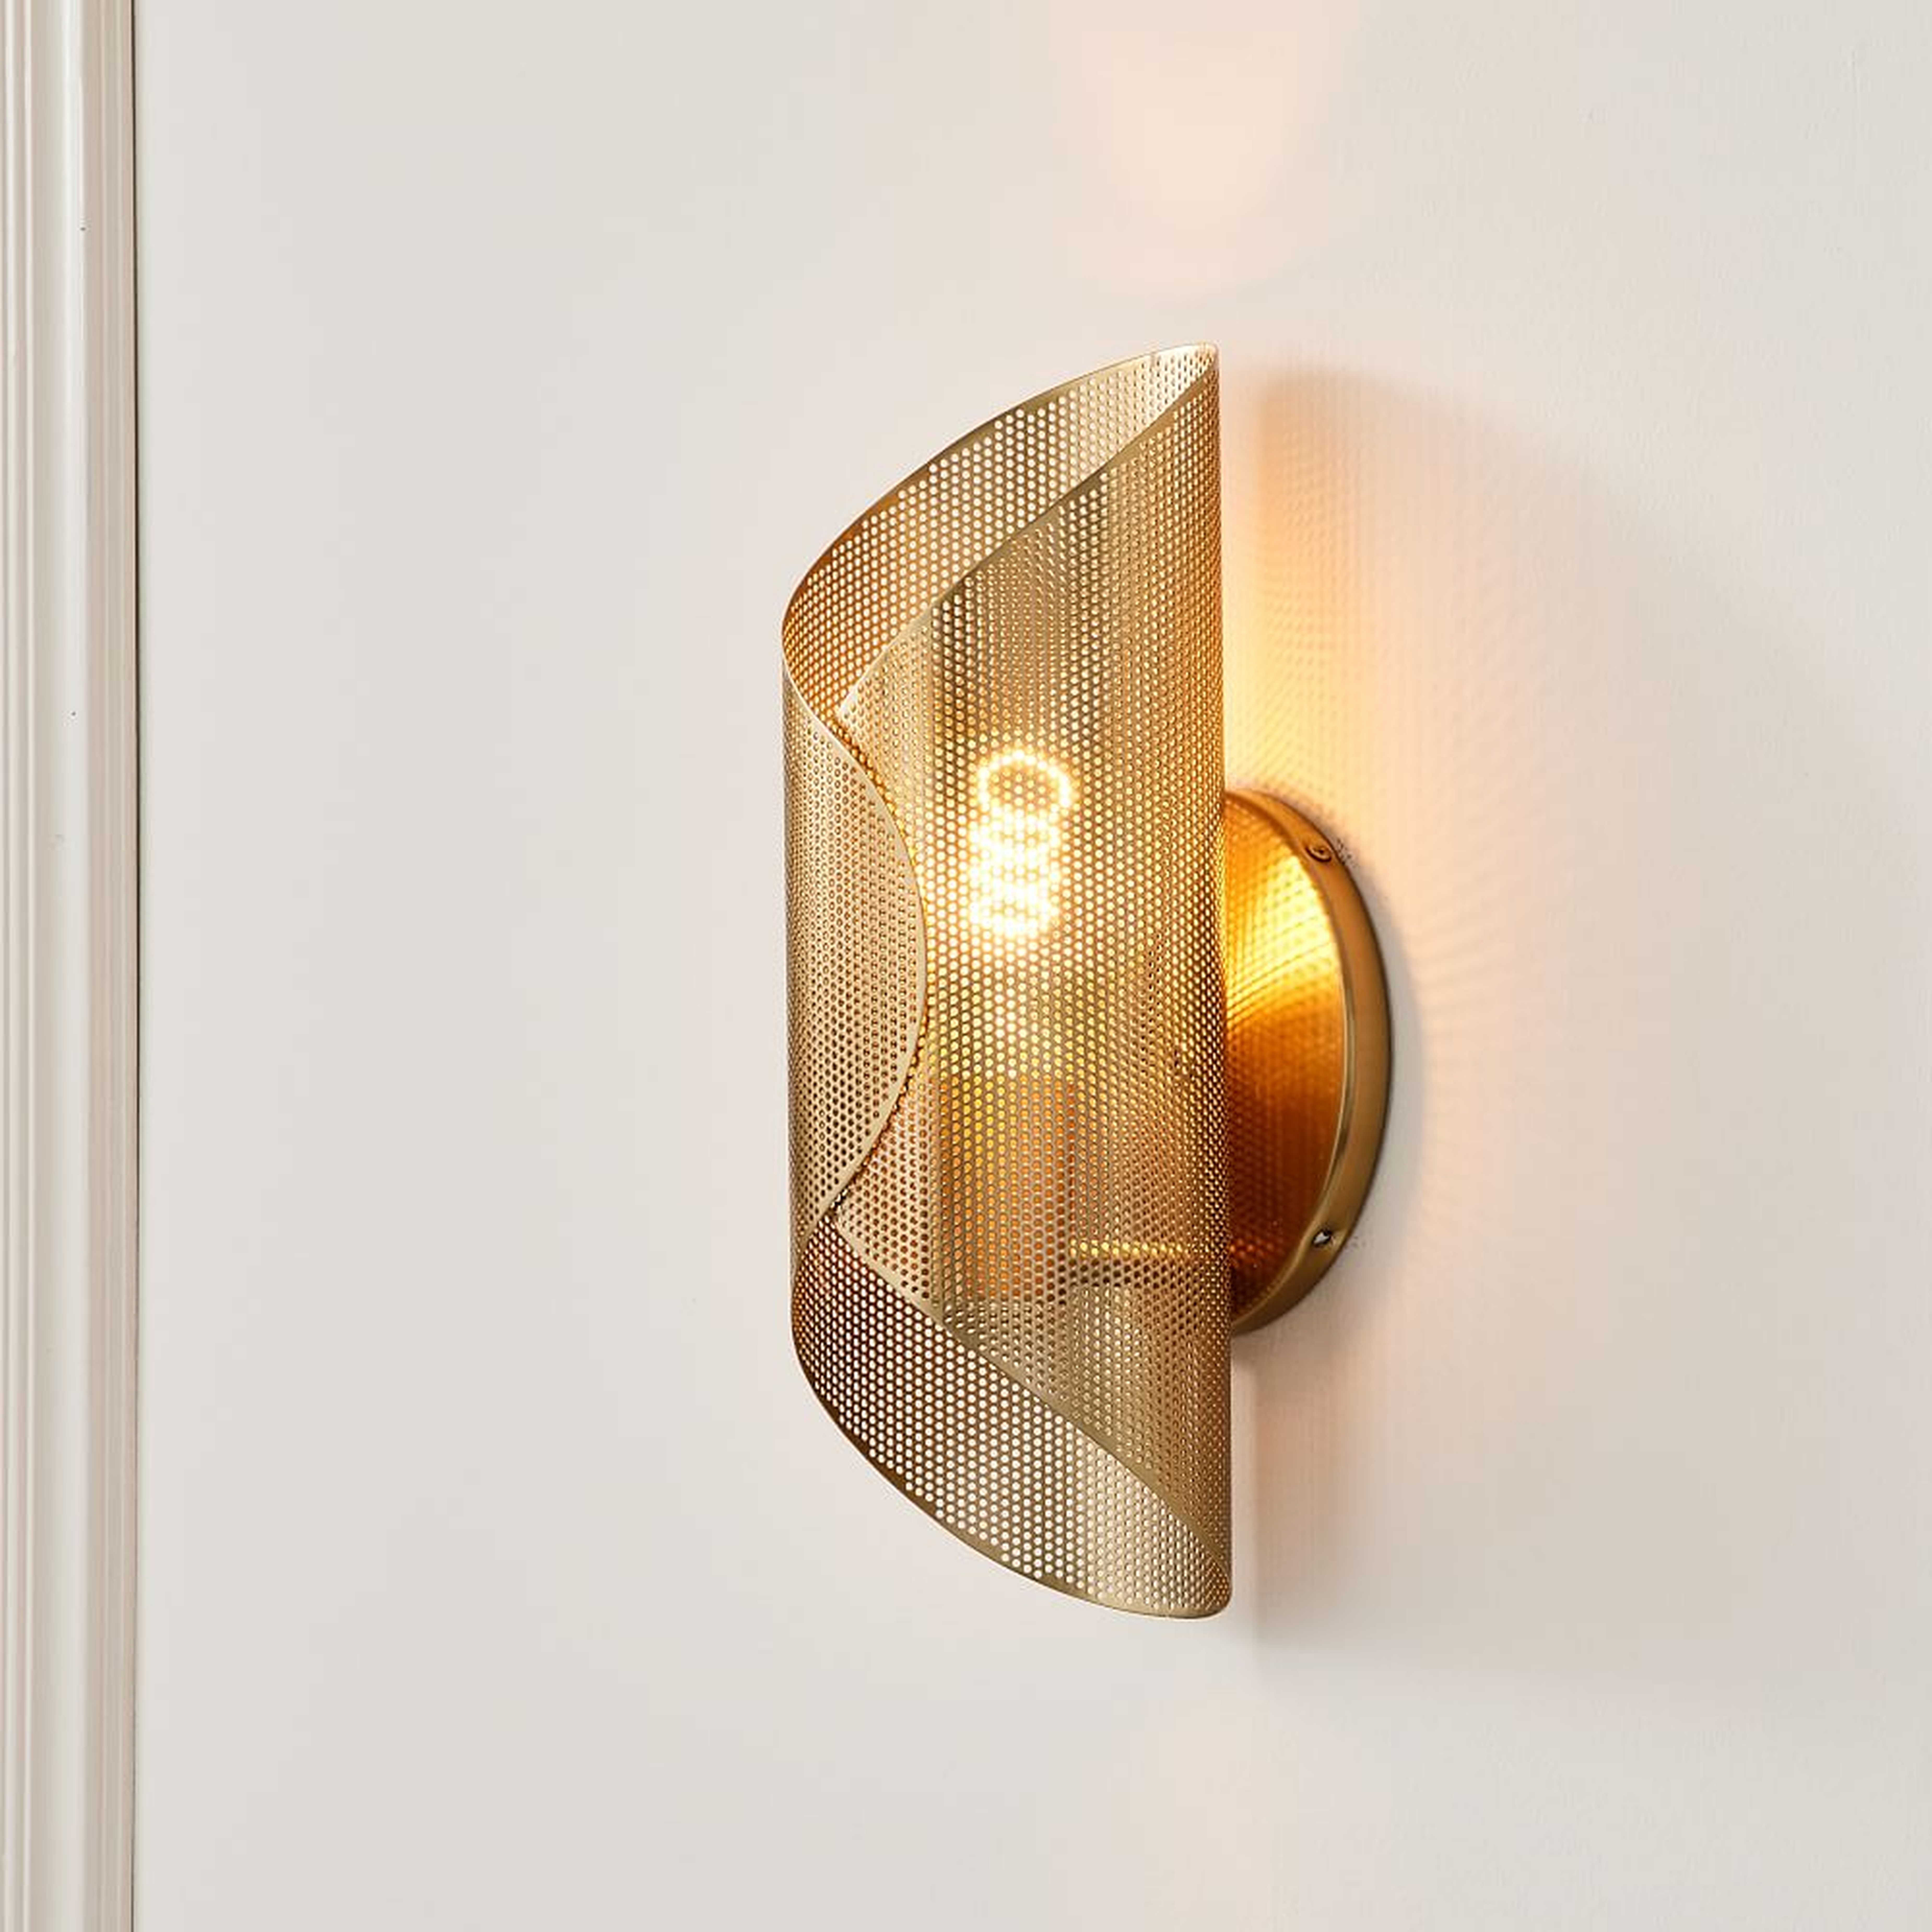 Curl Perforated Sconce, Antique Brass S/2 - West Elm